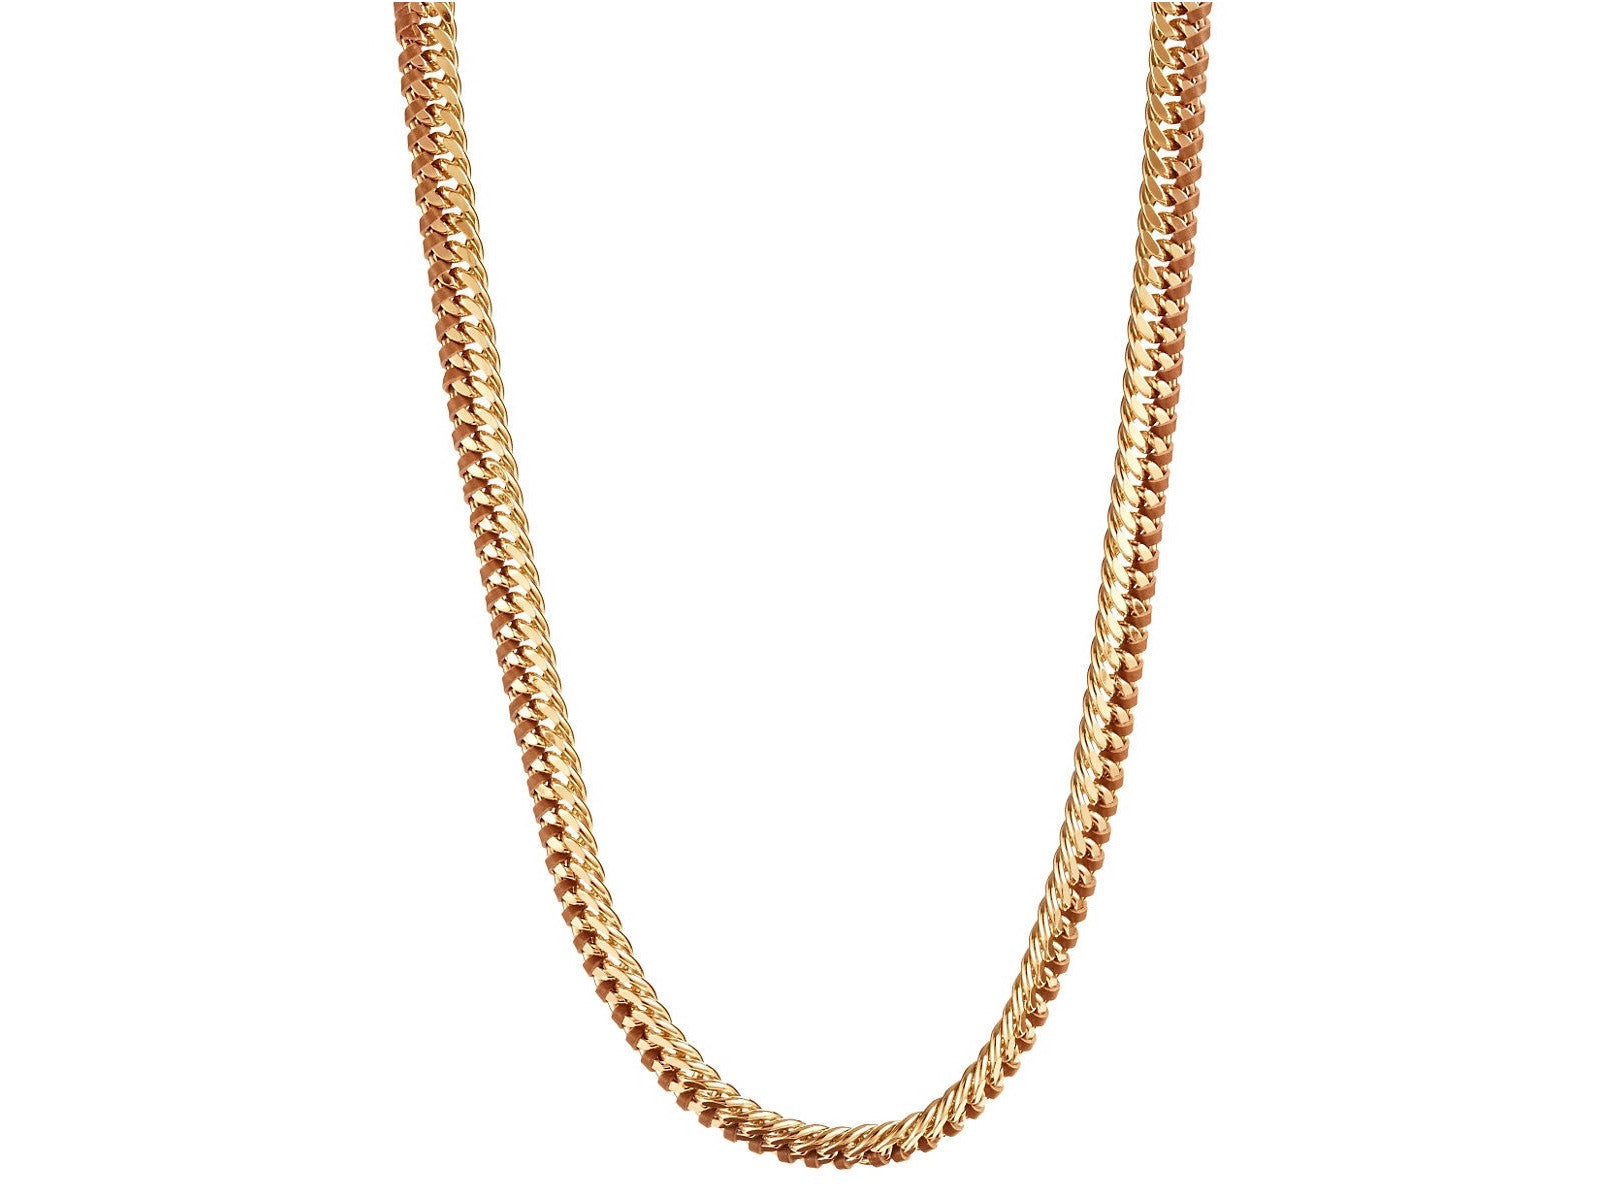 Trina Turk Leather Chain Necklace